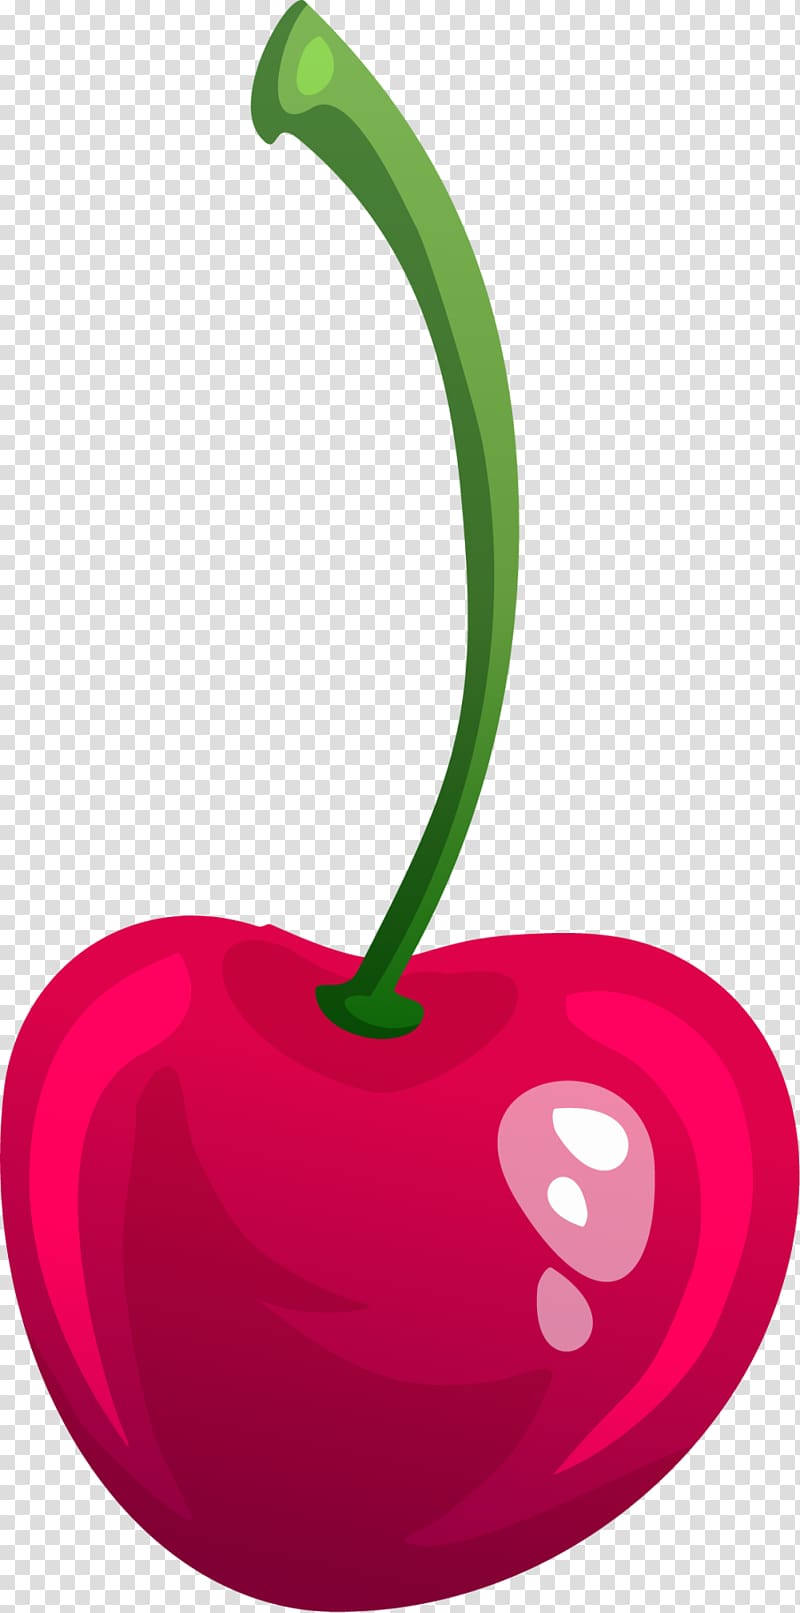 Cherry Red Cerise, Hand painted red cherry transparent background PNG clipart